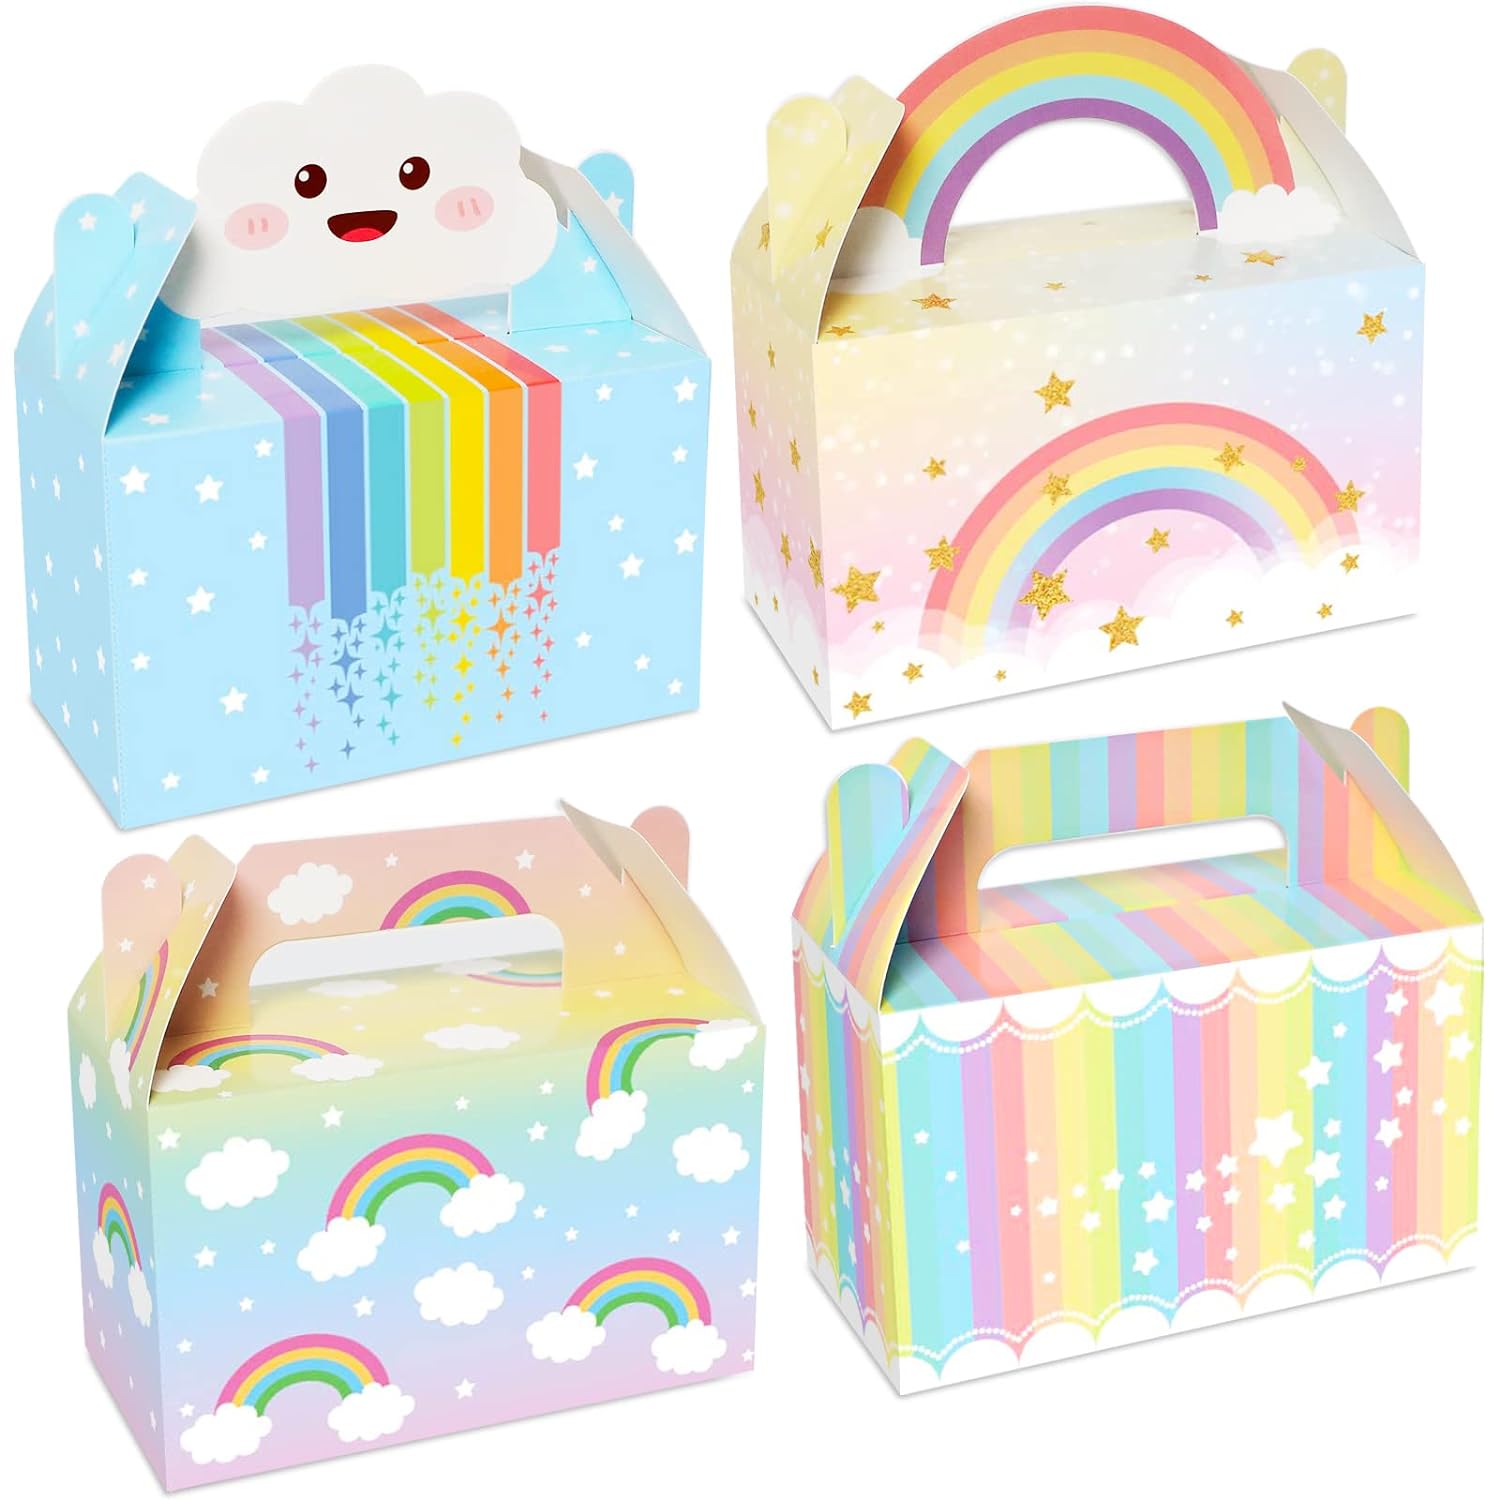 Great Choice Products 12 Pack Rainbow Party Favor Boxes Cloud Pastel Happy Birthday Treat Bags Rainbow Theme Colorful Candy Goodies Valentine'S Day?